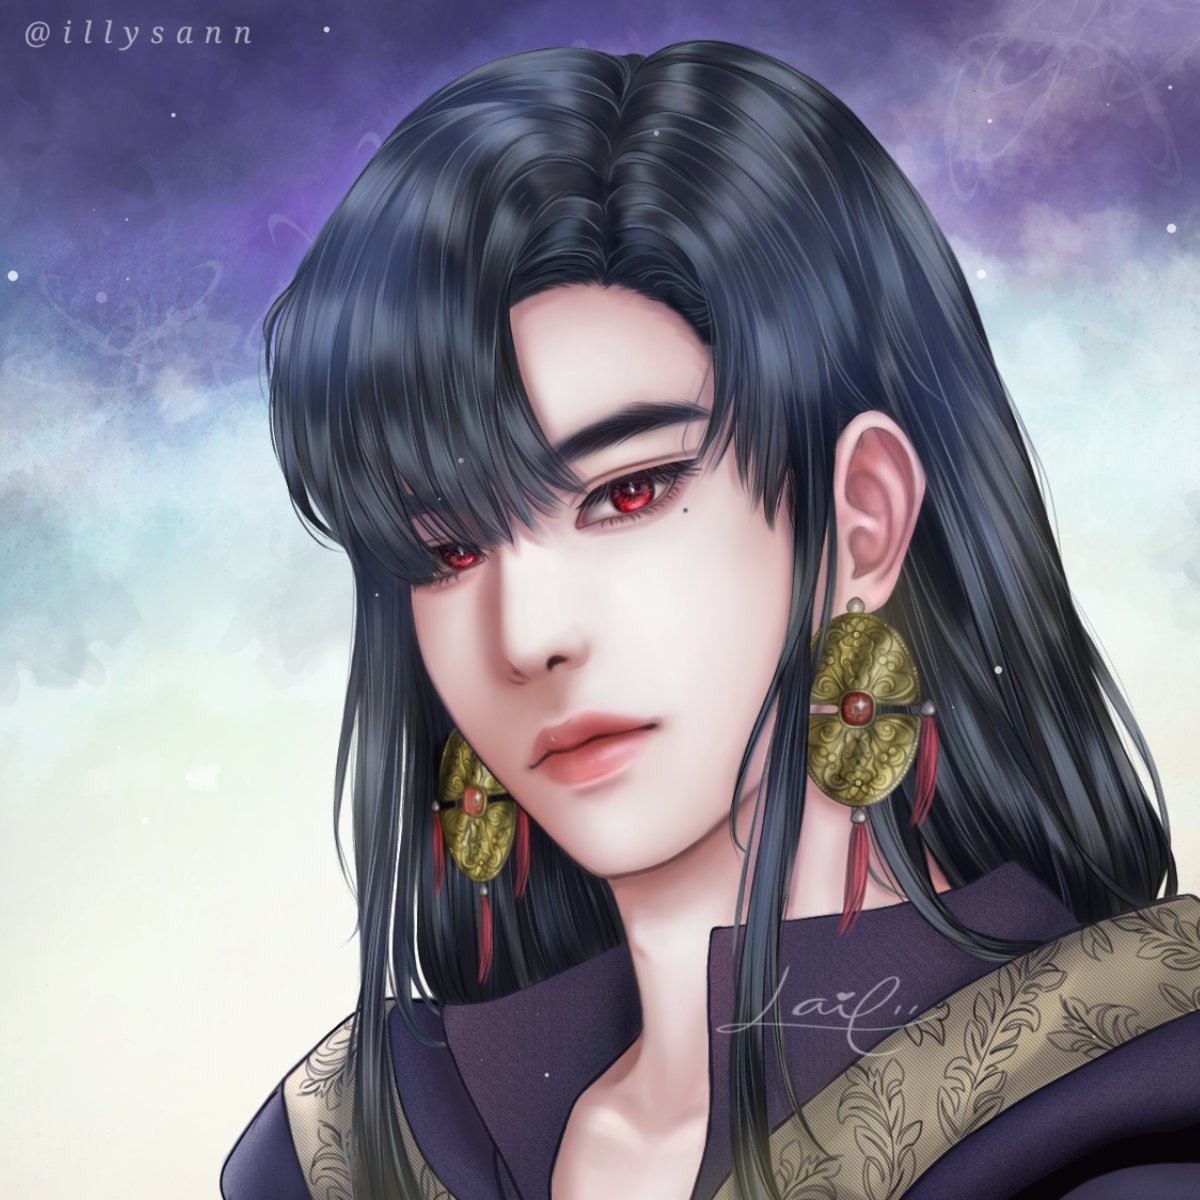 Lucas fanart from one of my favorite manhwa, "Who Made Me a Princess&q...